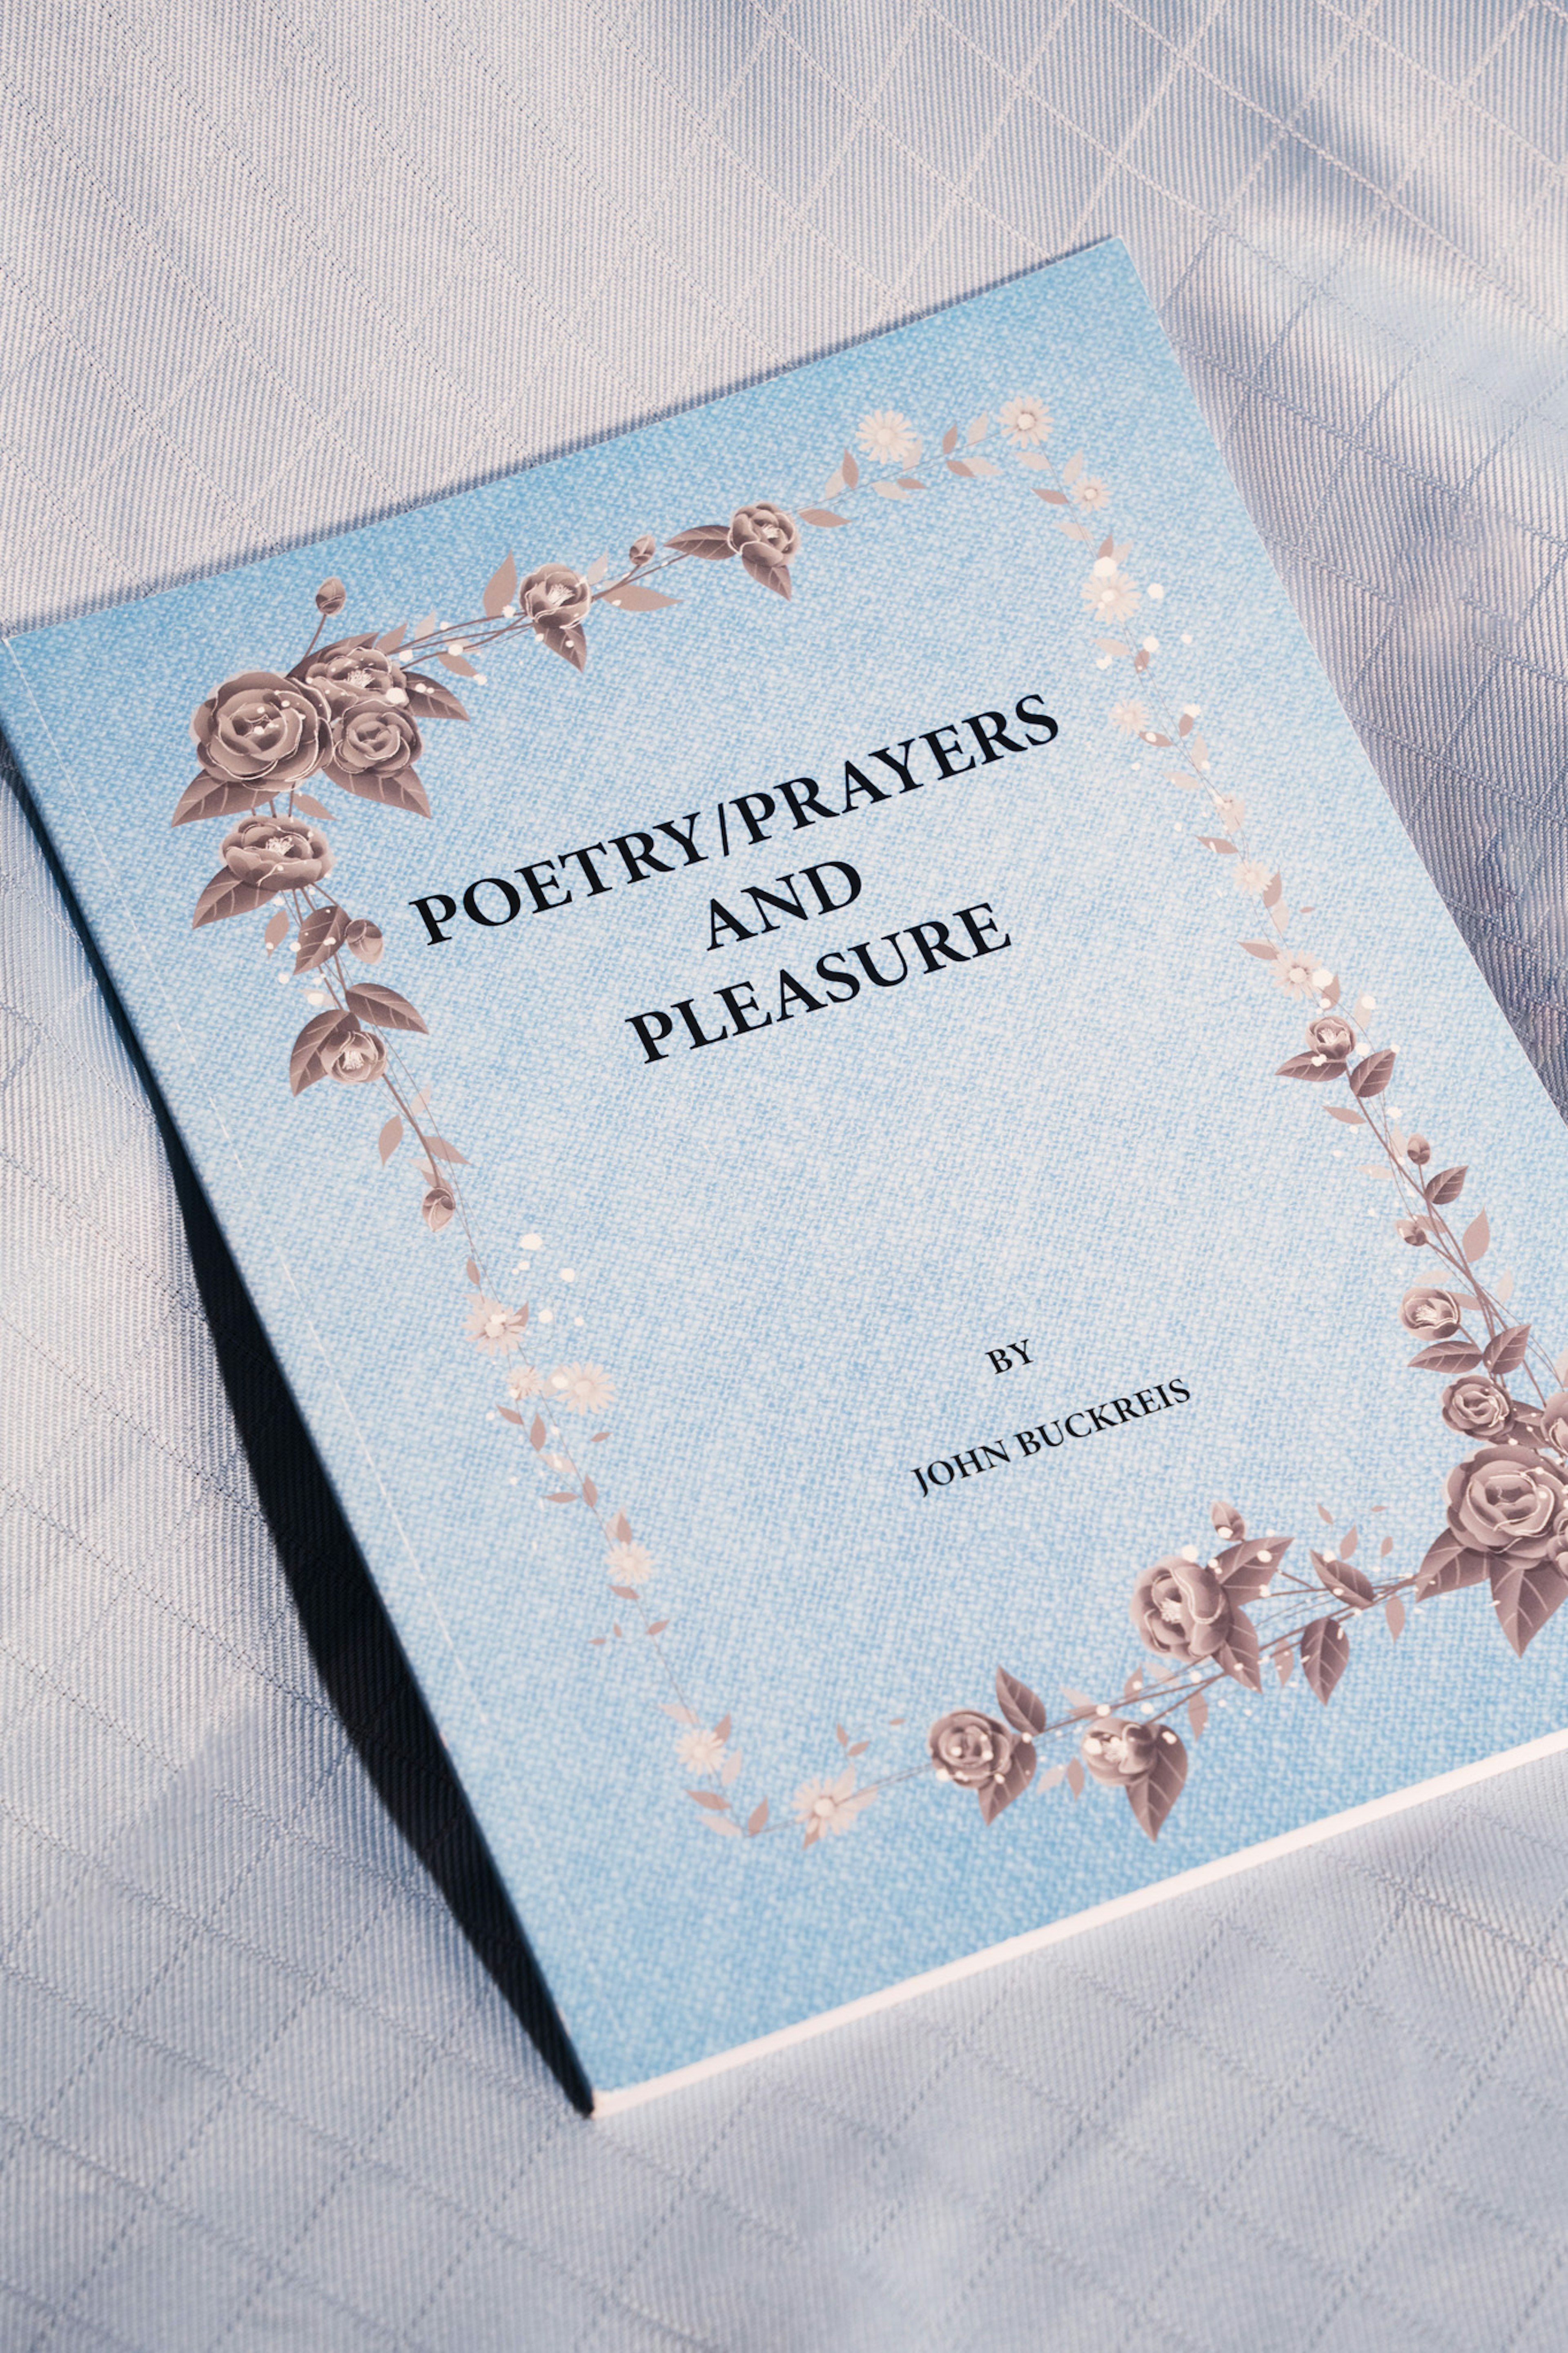 poetry/prayers and pleasure book cover